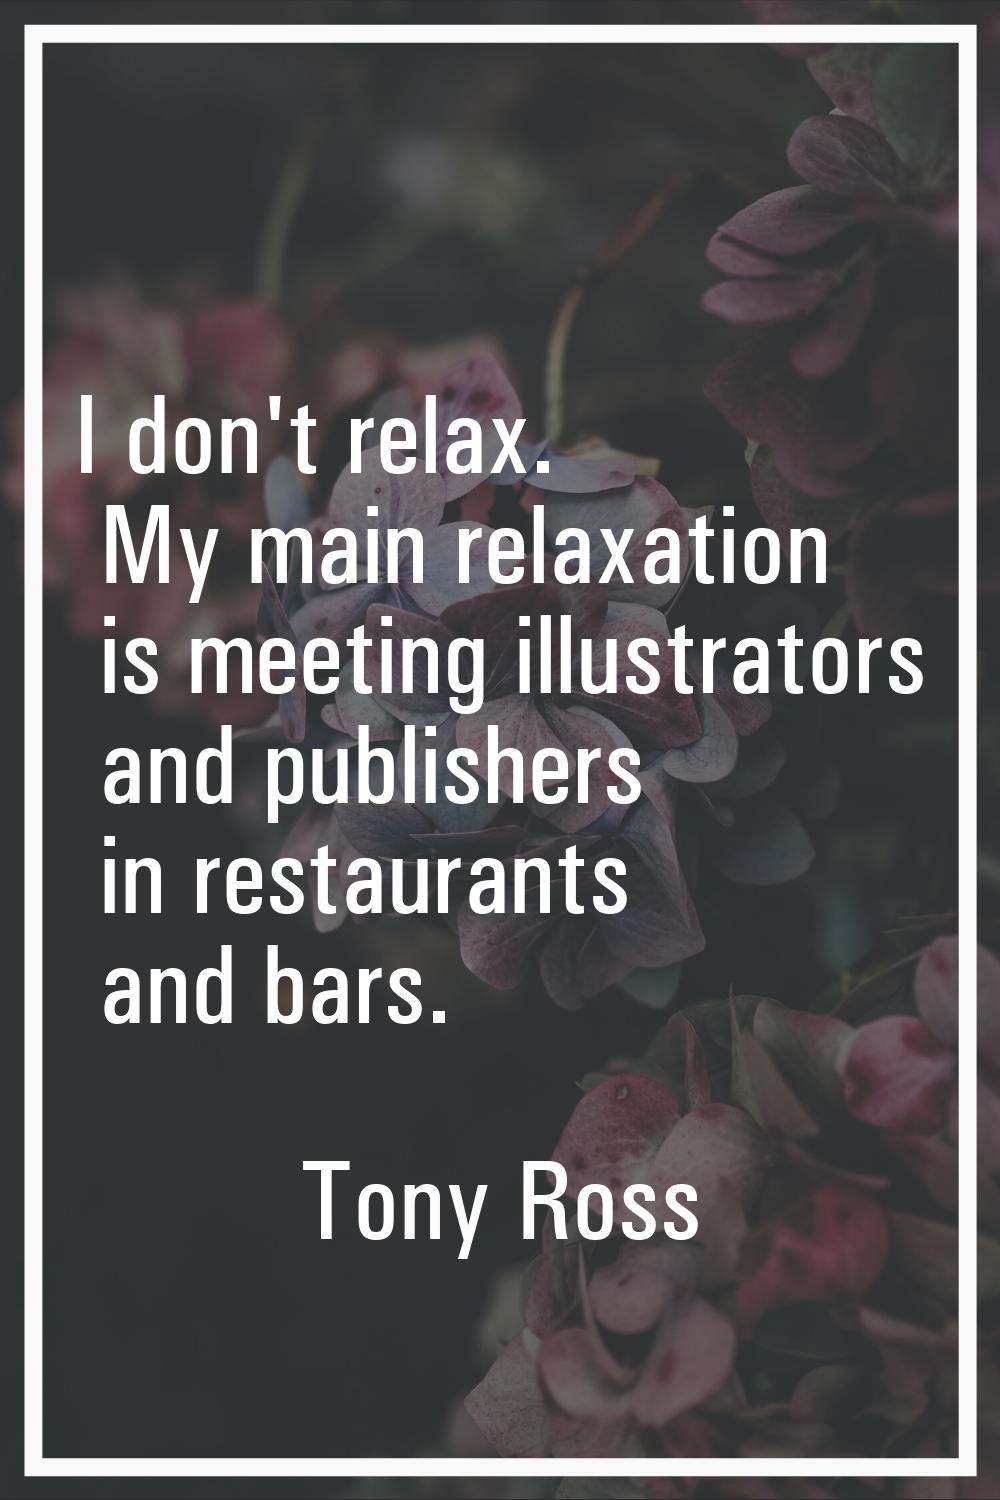 I don't relax. My main relaxation is meeting illustrators and publishers in restaurants and bars.